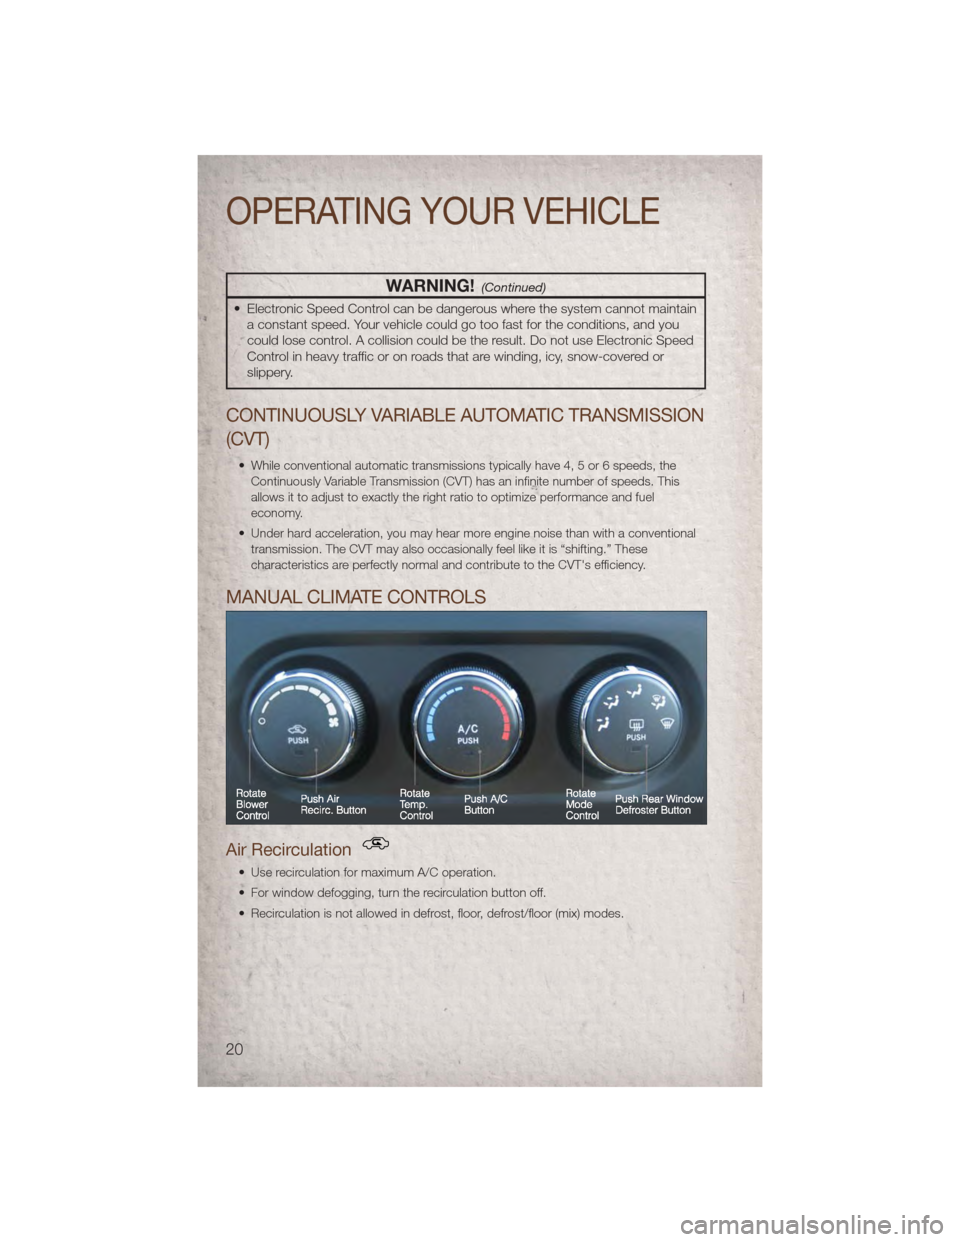 JEEP COMPASS 2011 1.G Owners Manual WARNING!(Continued)
• Electronic Speed Control can be dangerous where the system cannot maintaina constant speed. Your vehicle could go too fast for the conditions, and you
could lose control. A col